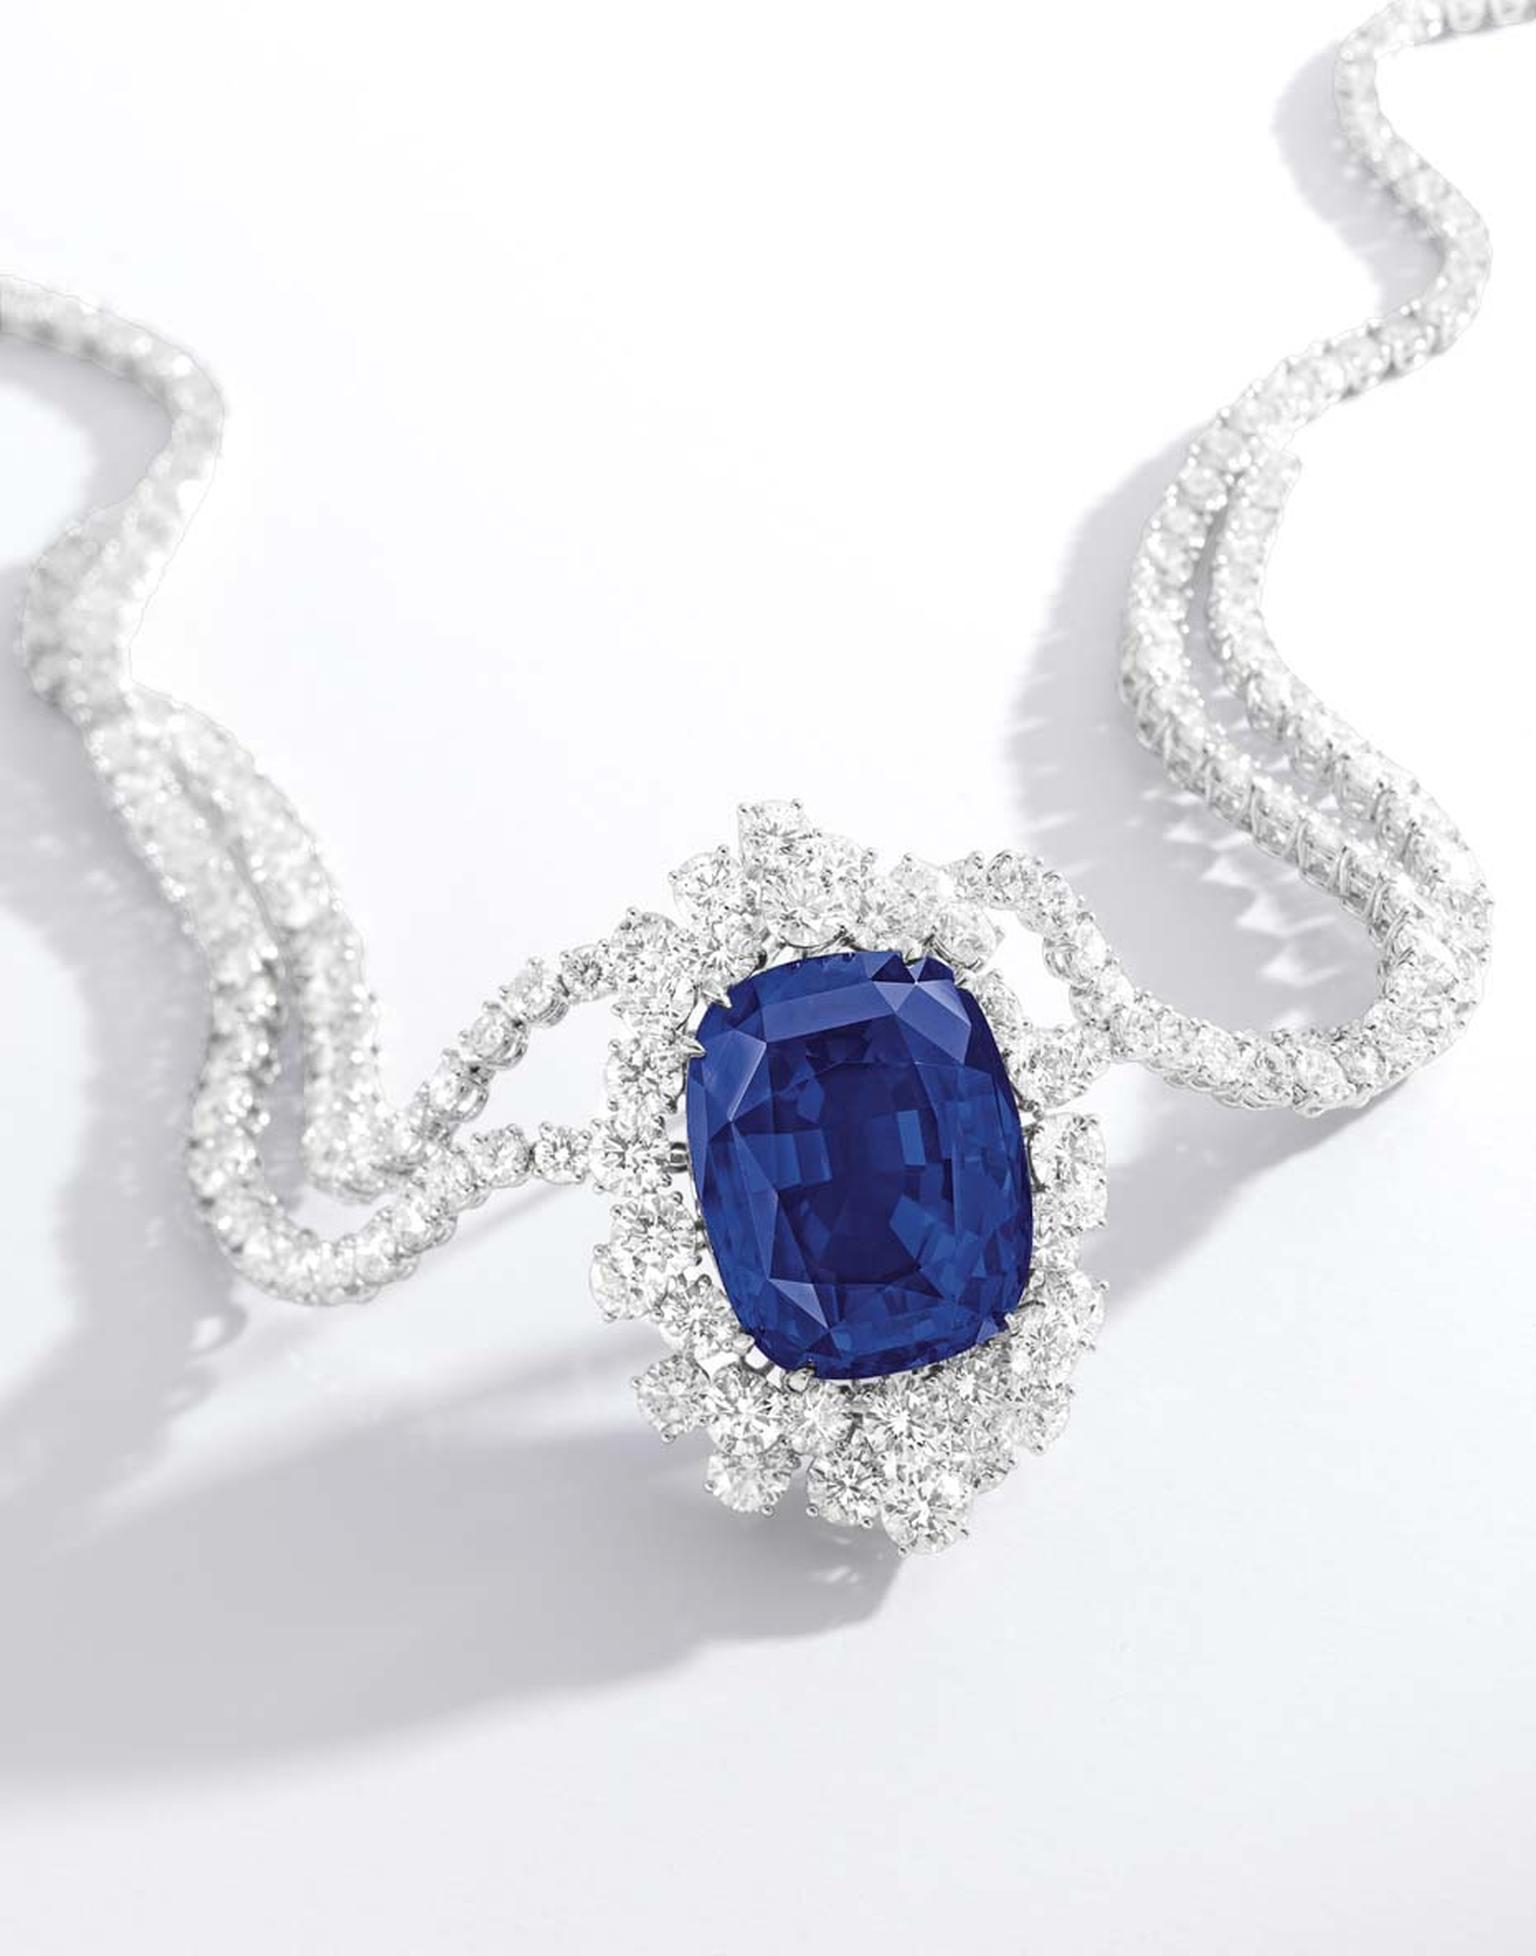 A royal blue sapphire and diamond necklace (102.61ct) completely free of heat treatment and virtually inclusion-free was sold for US$4,179,487 million.